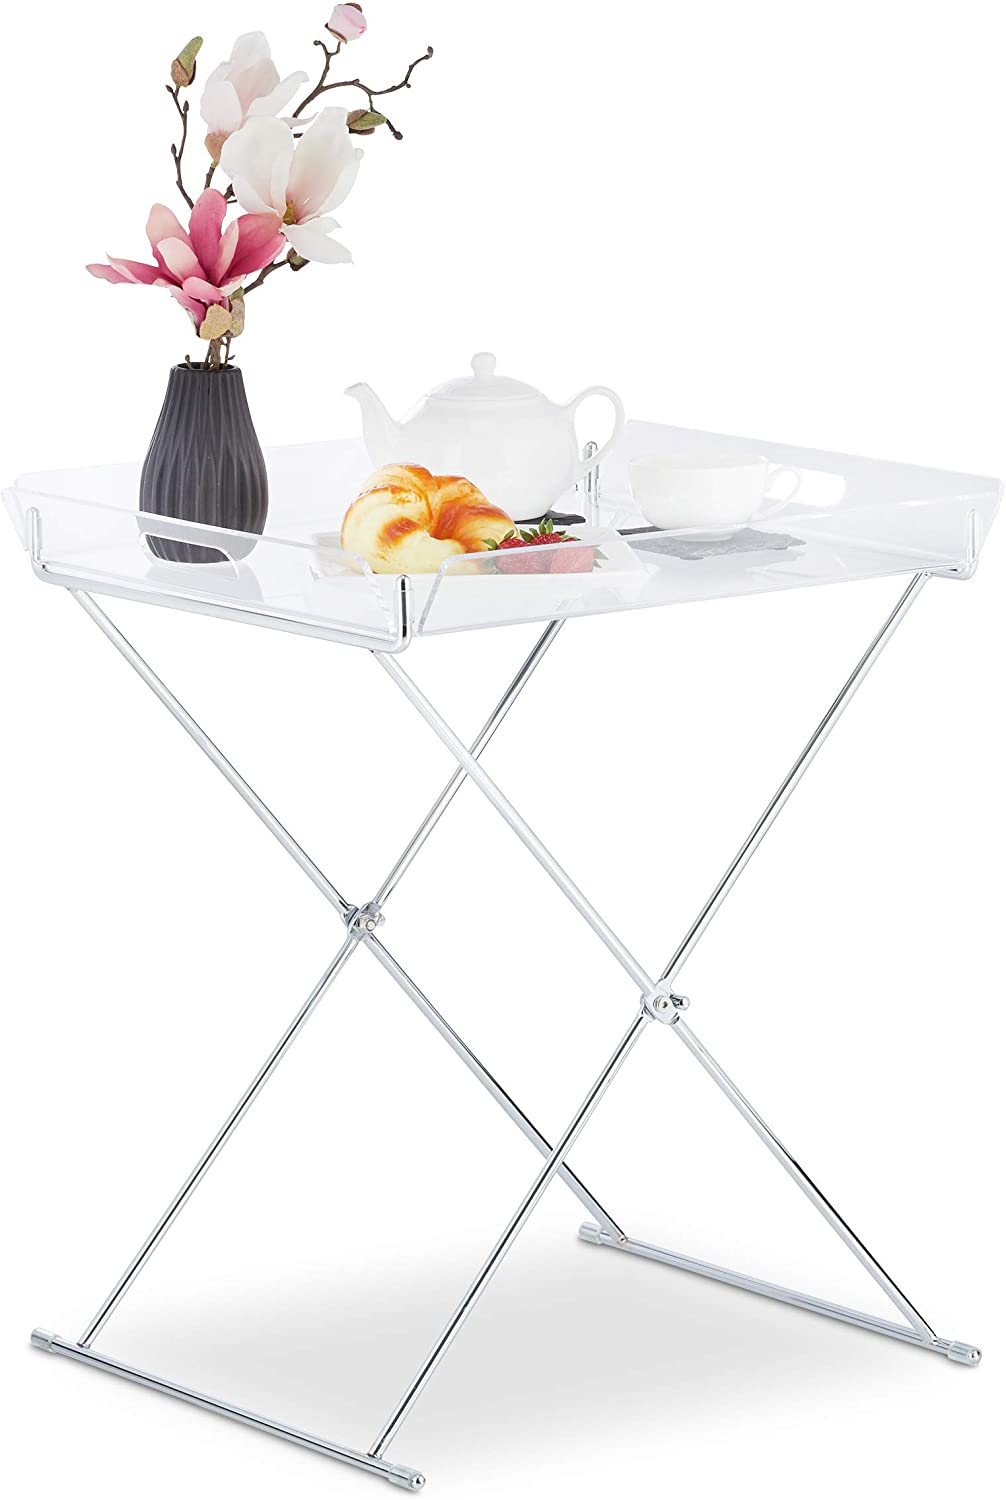 Relaxdays Folding Tray, Removable Acrylic Tray, Standing Tray with Metal Frame, 57 x 52 x 47.5 cm, Silver